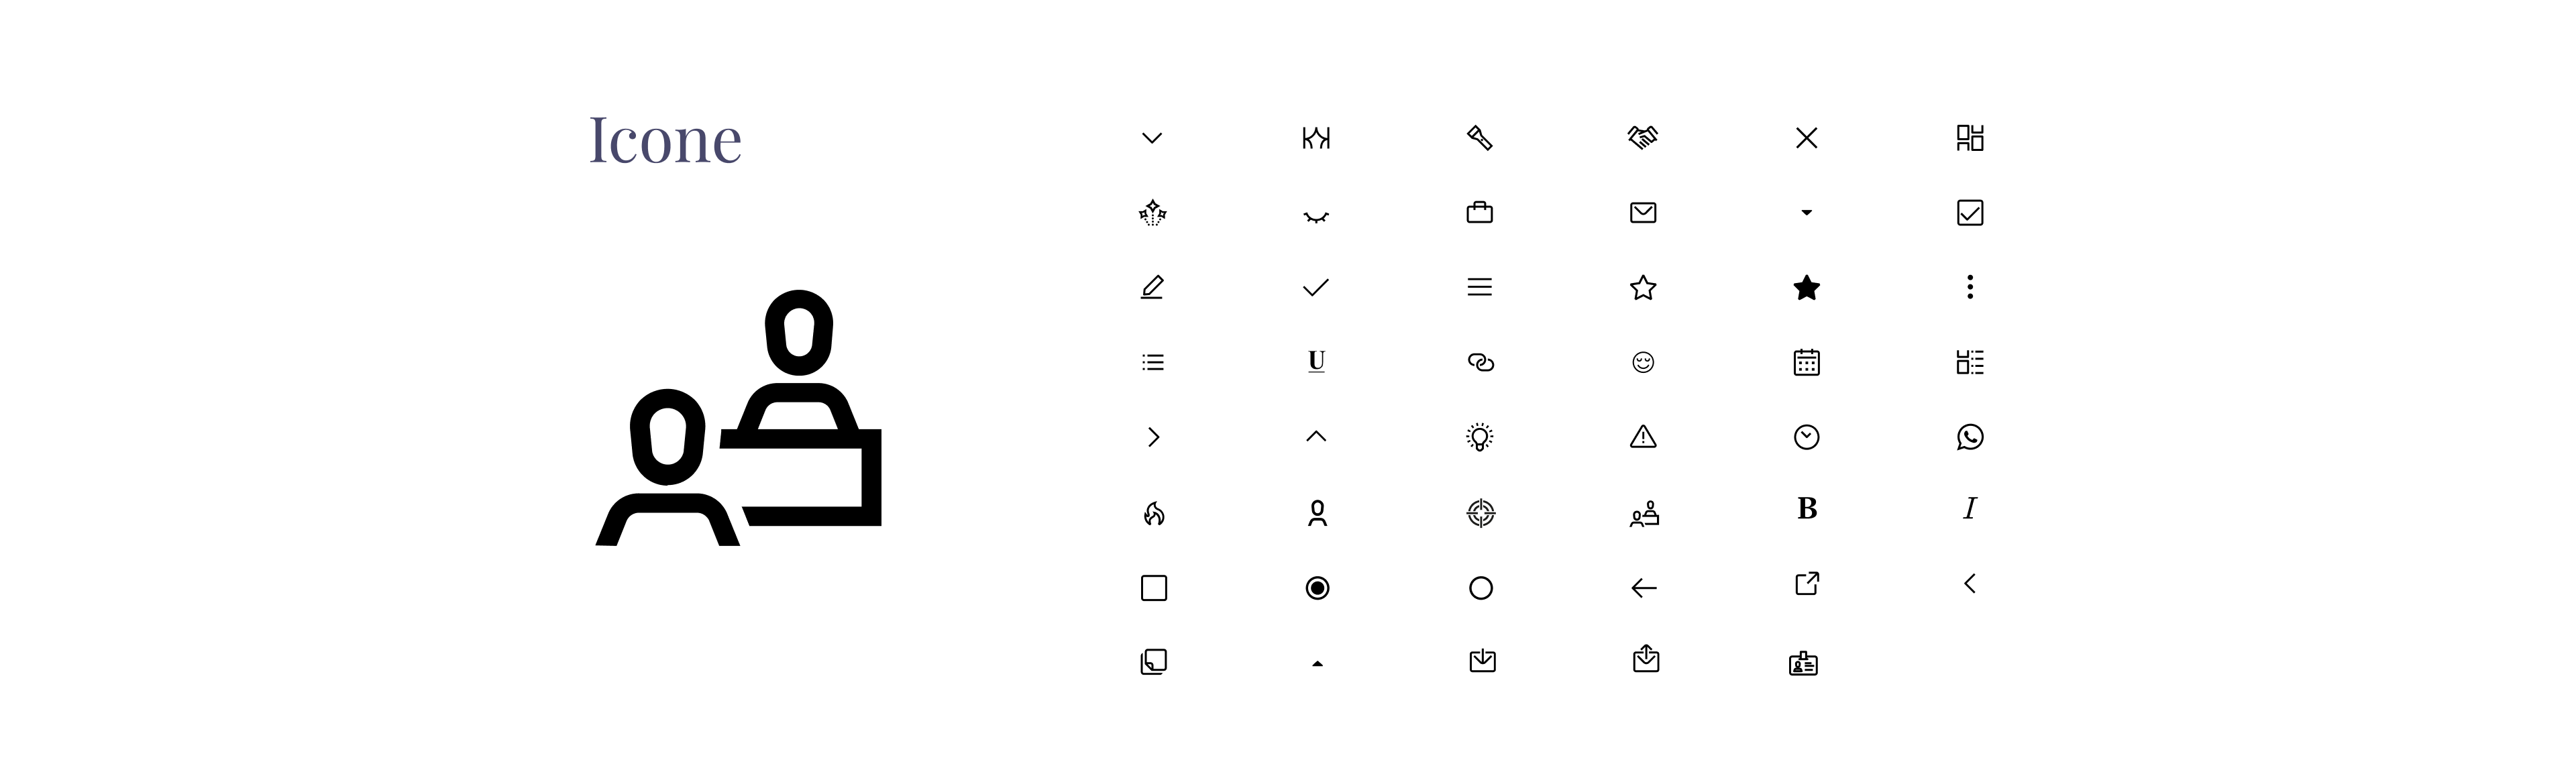 Some of the icons created, positioned in a grid with a larger icon on the left.